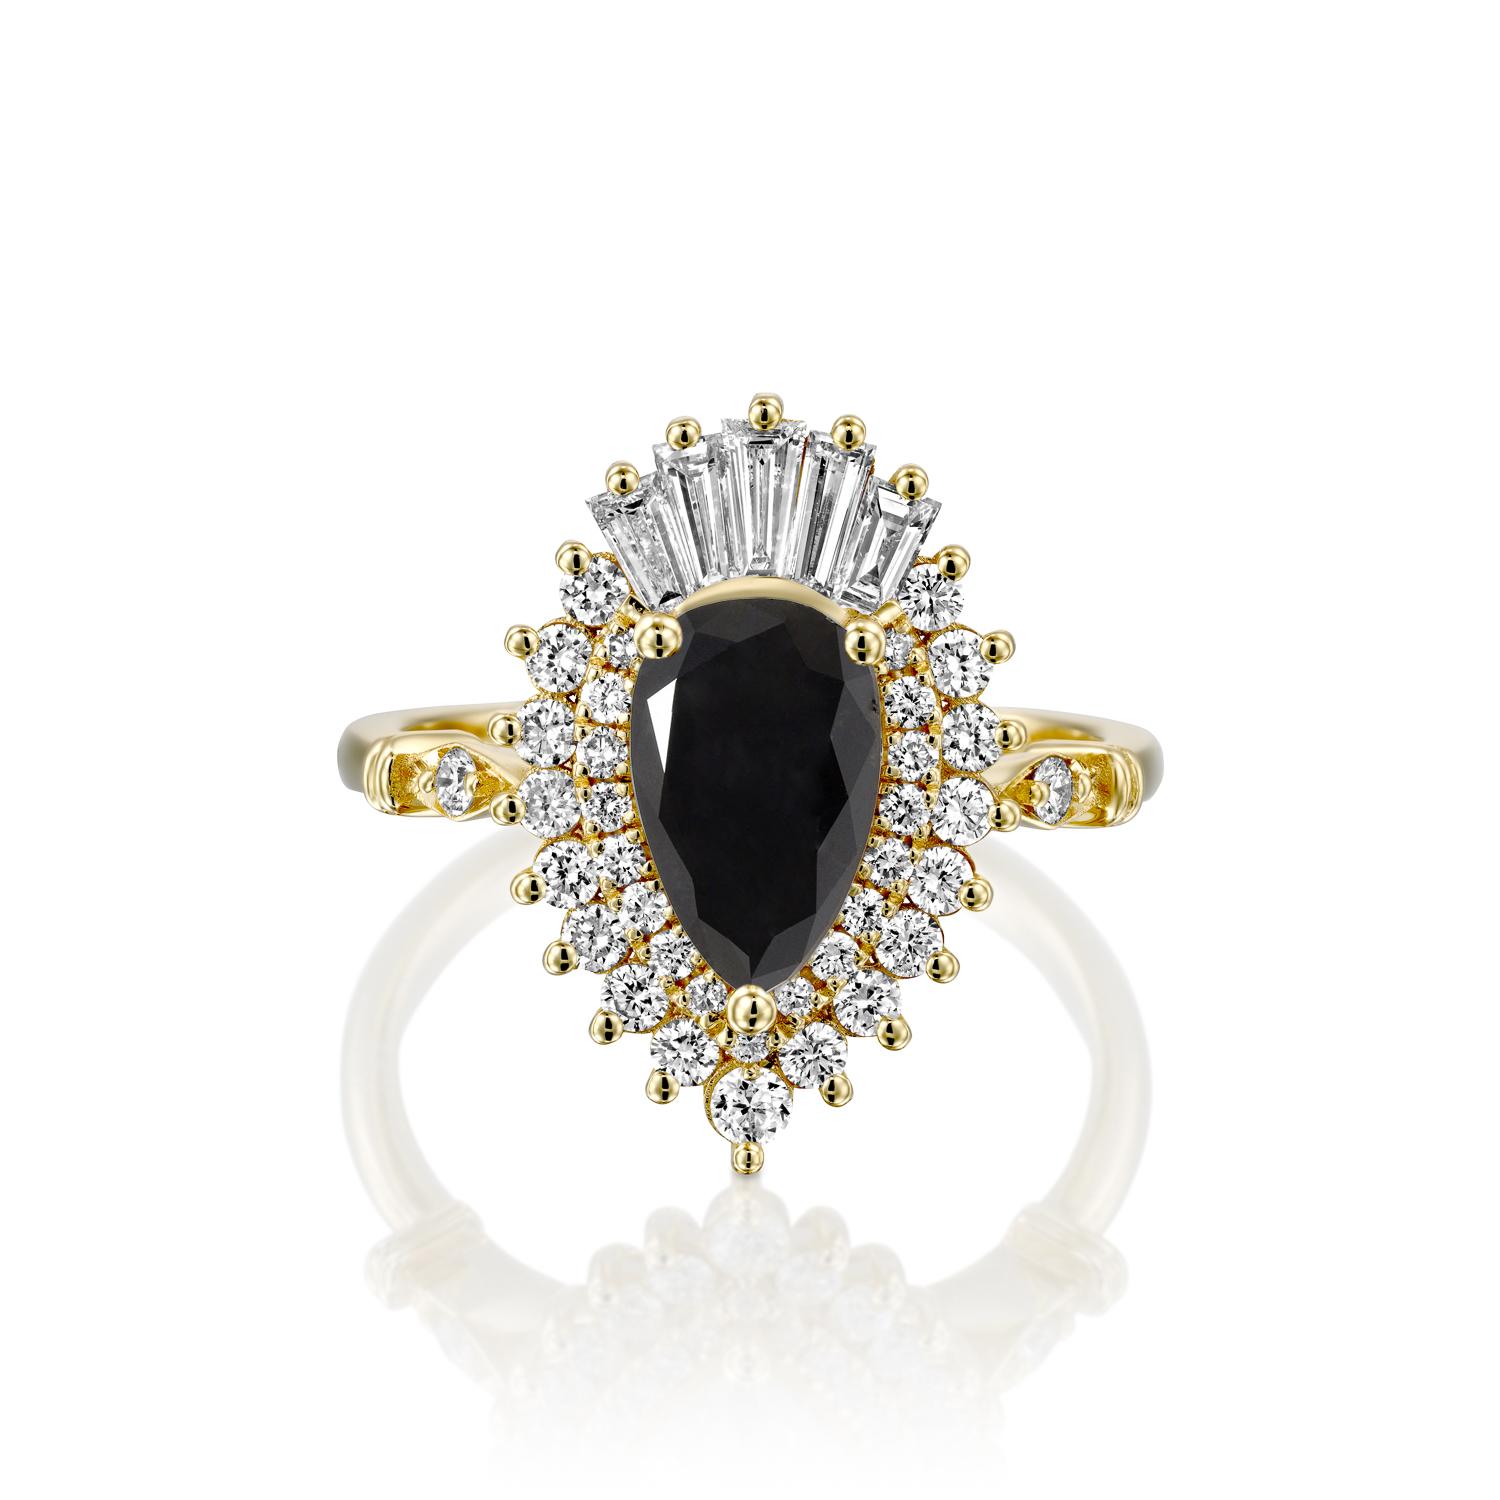 Beautiful solitaire with accents Victorian style diamond engagement ring. Center stone is natural, pear shaped, AAA quality Black Diamond of 3/4 carat and it is surrounded by smaller natural diamonds approx. 0.75 total carat weight. The total carat